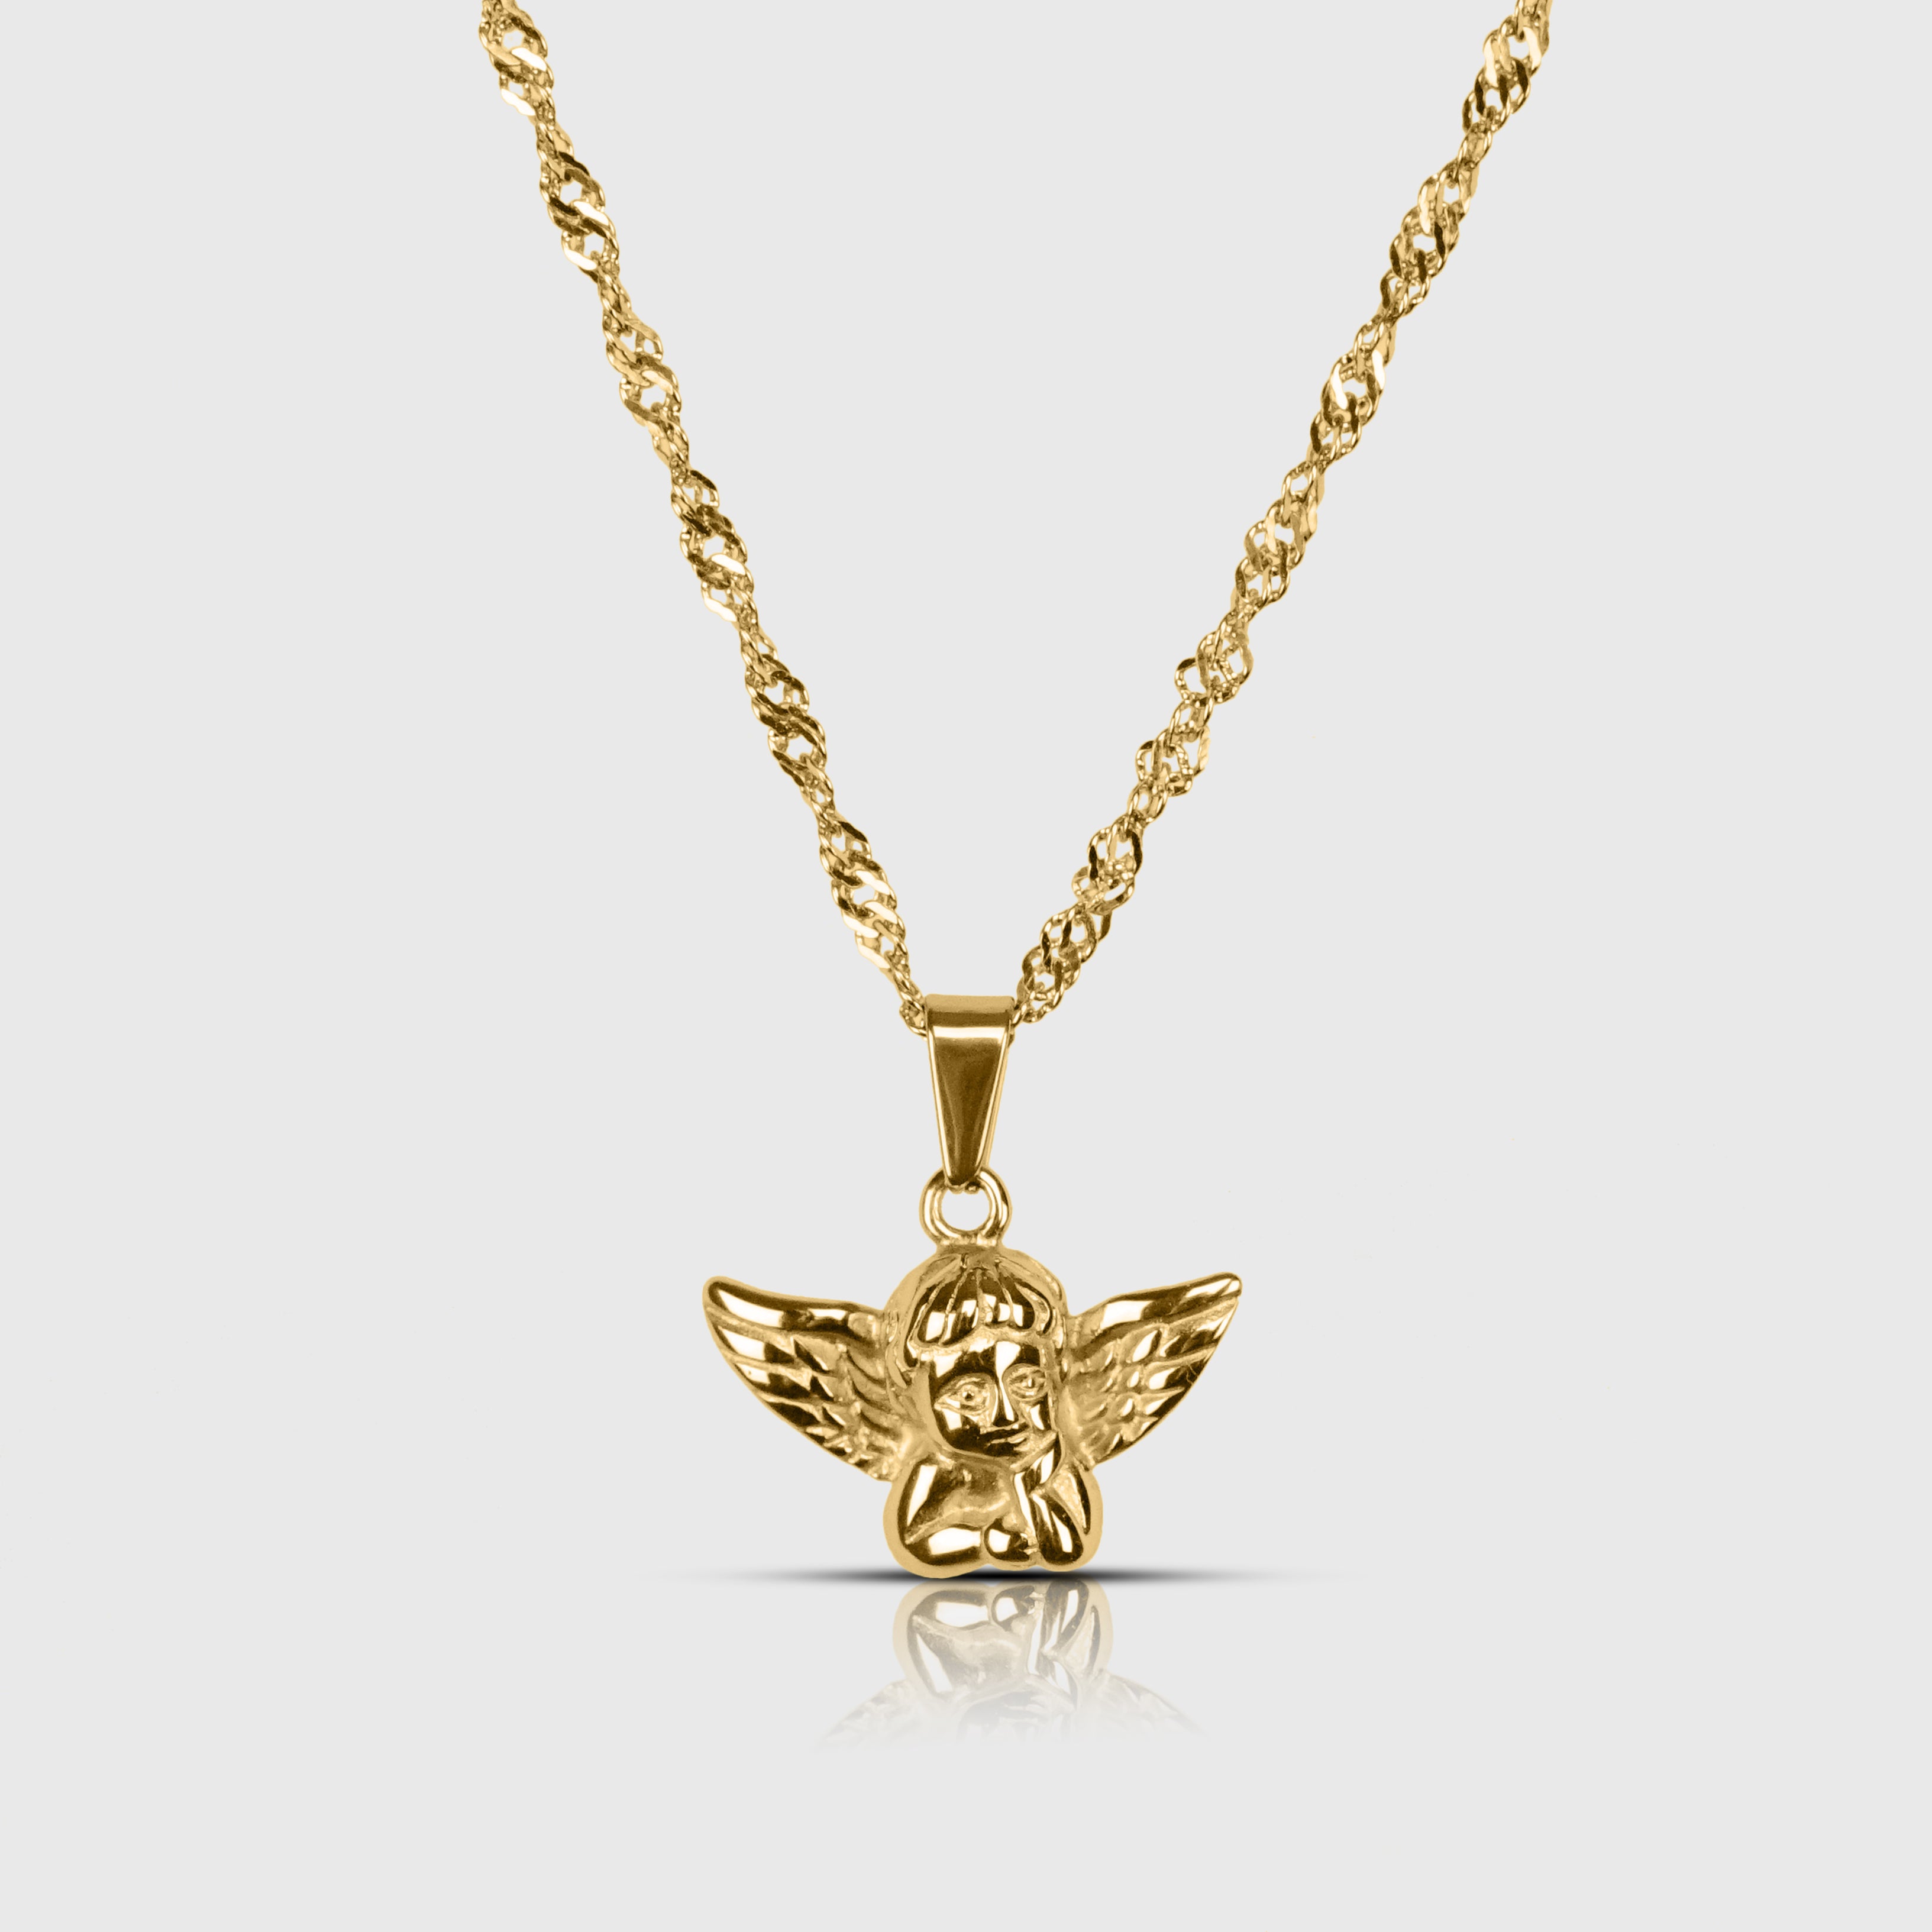 ANGEL NECKLACE - GOLD TONE